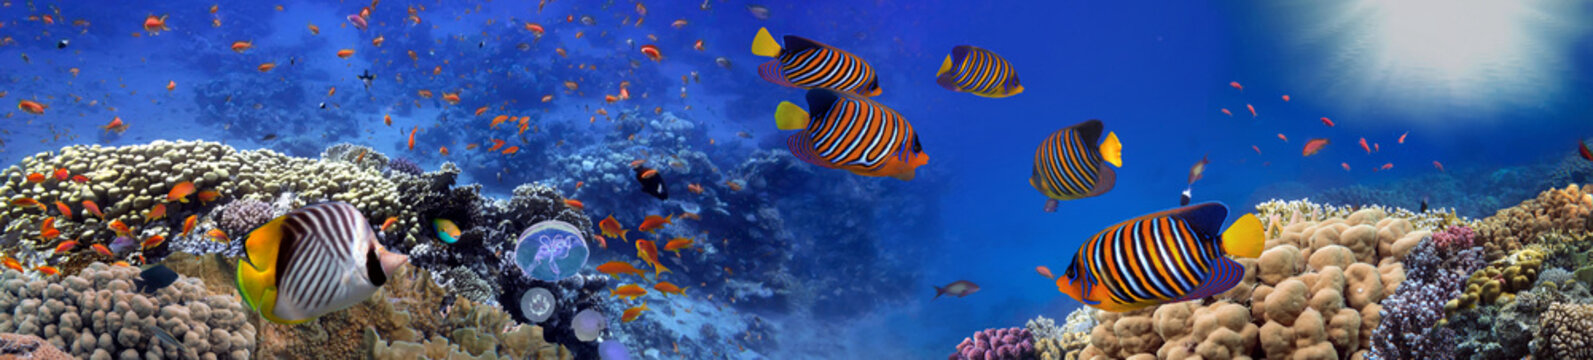 Coral reef underwater panorama with tropical fish